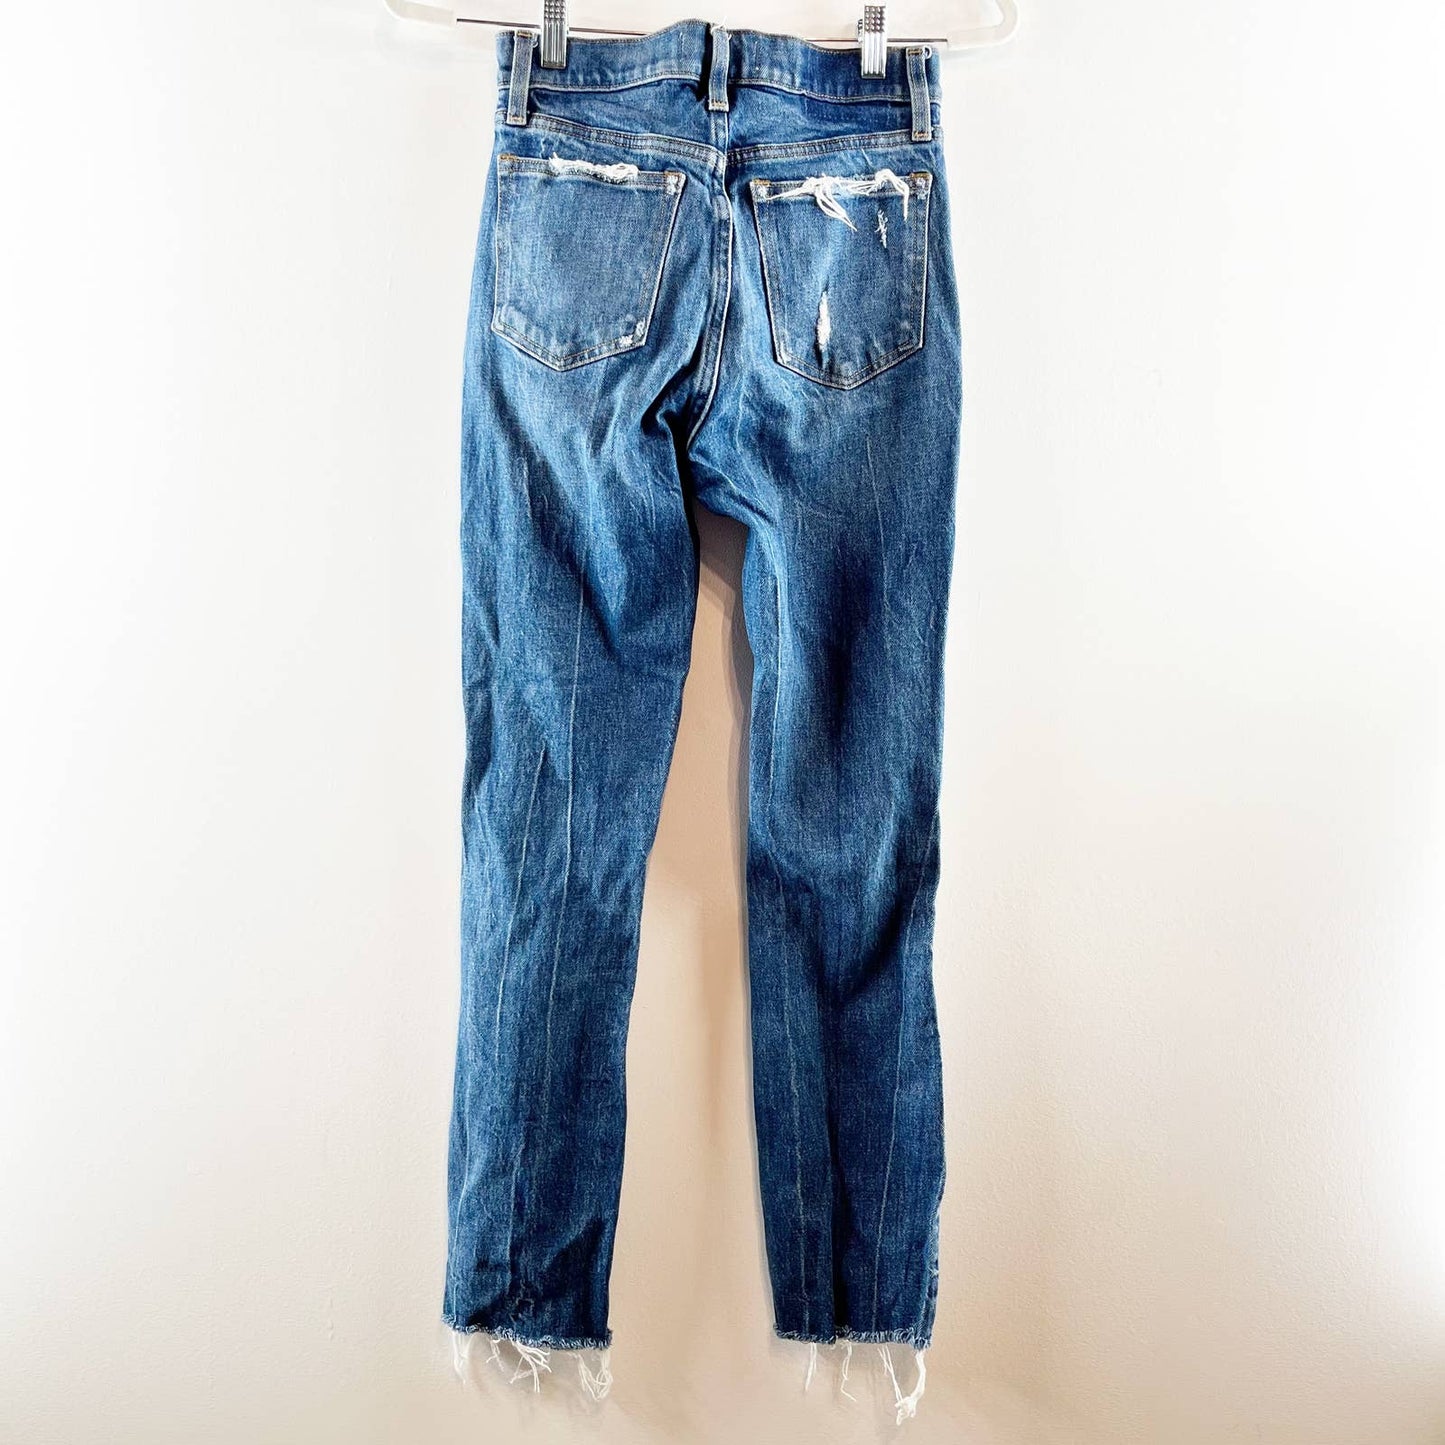 Abercrombie & Fitch High Rise Distressed Mom Jeans Medium Wash Blue 25 / 0 Long